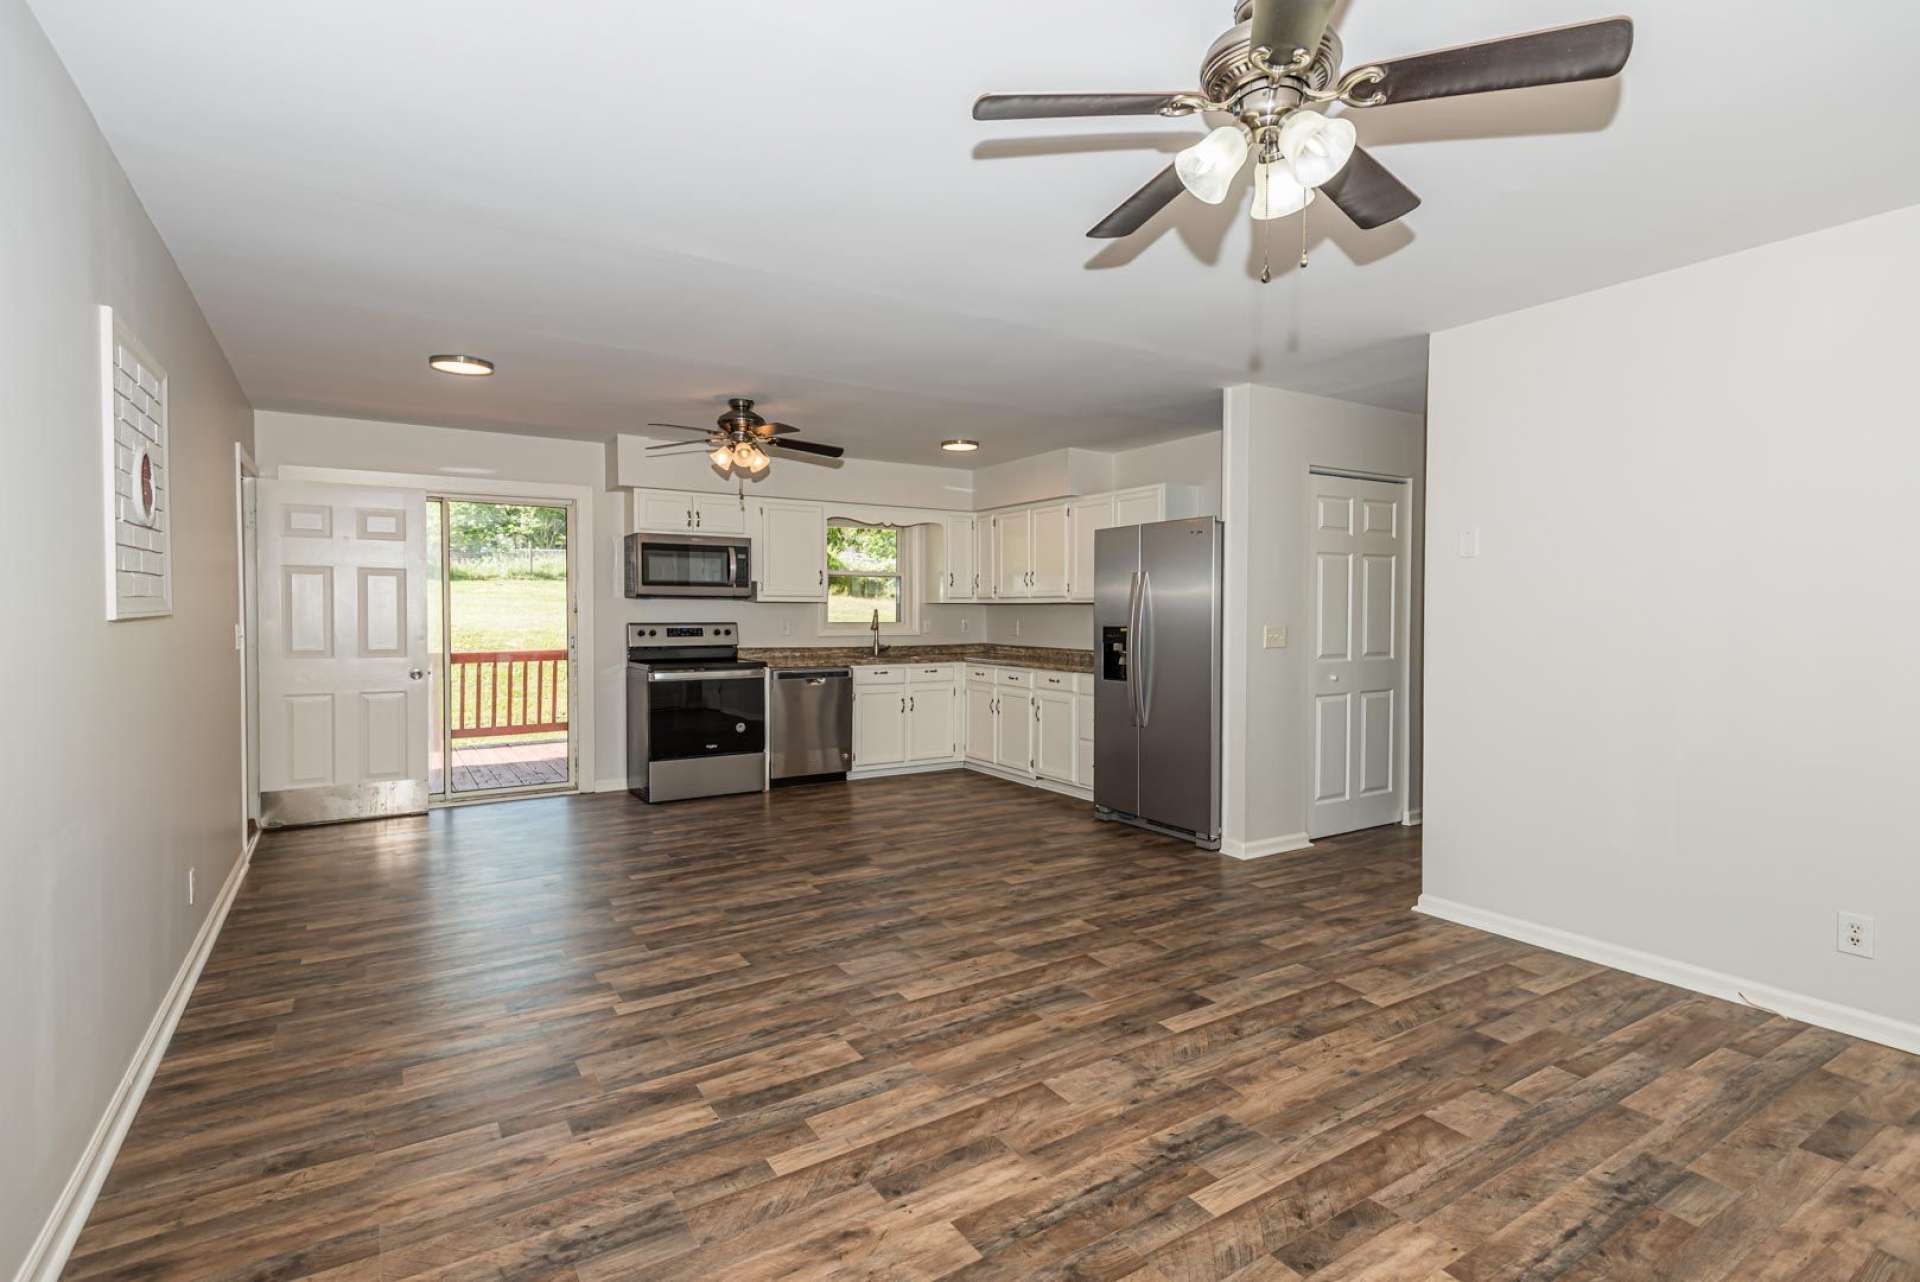 A totally open floor plan allows for easy flow when entertaining or simply enjoying time spent at home.